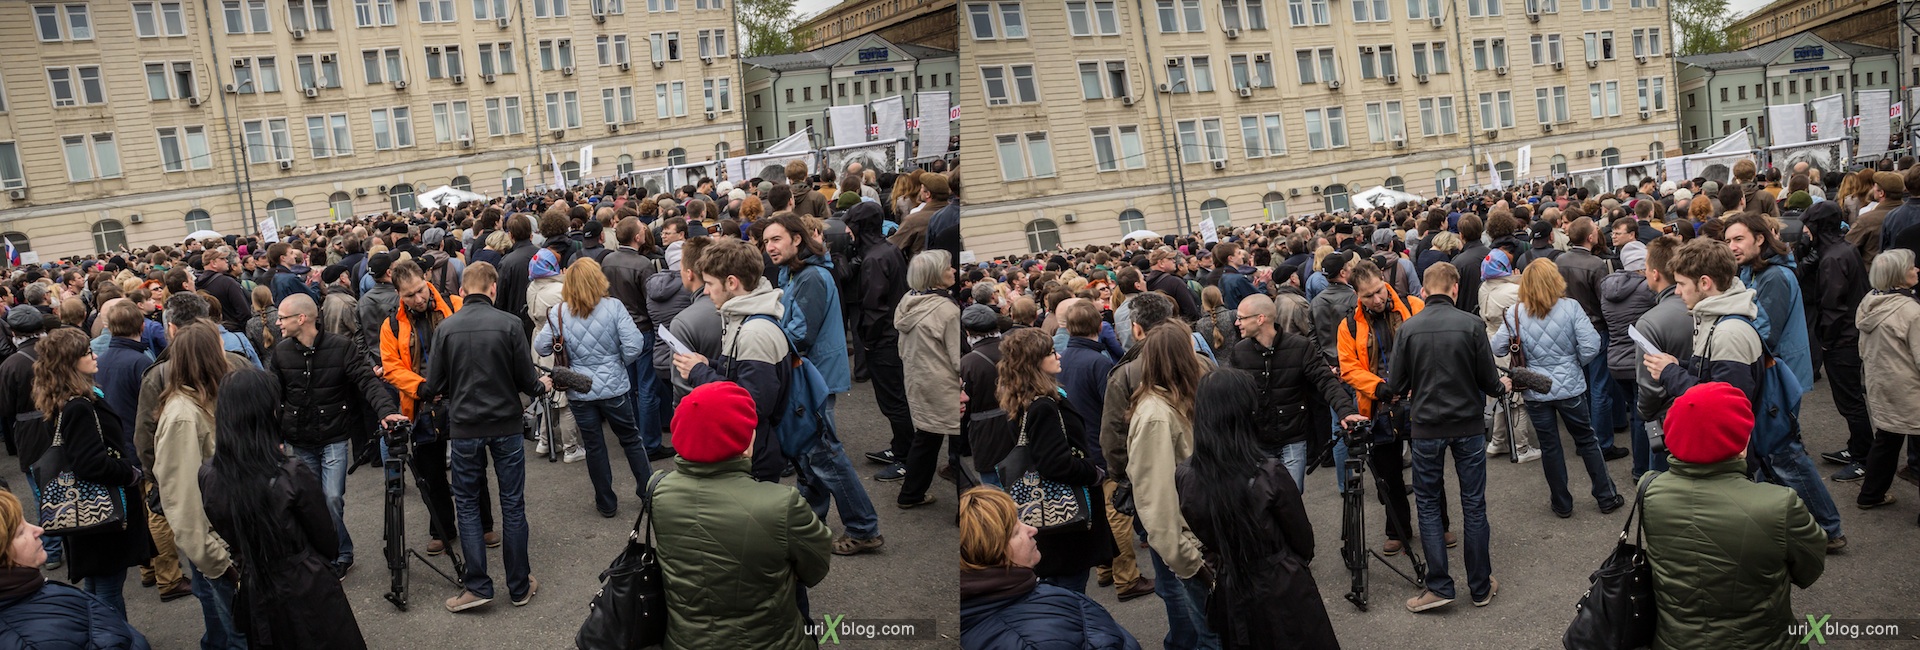 2013, Russia, Moscow, Demonstration, Rally, Meeting, protest, Bolotnaya square, Putin, Navalny, Politics, political prisoners, 3D, stereo pair, cross-eyed, crossview, cross view stereo pair, stereoscopic